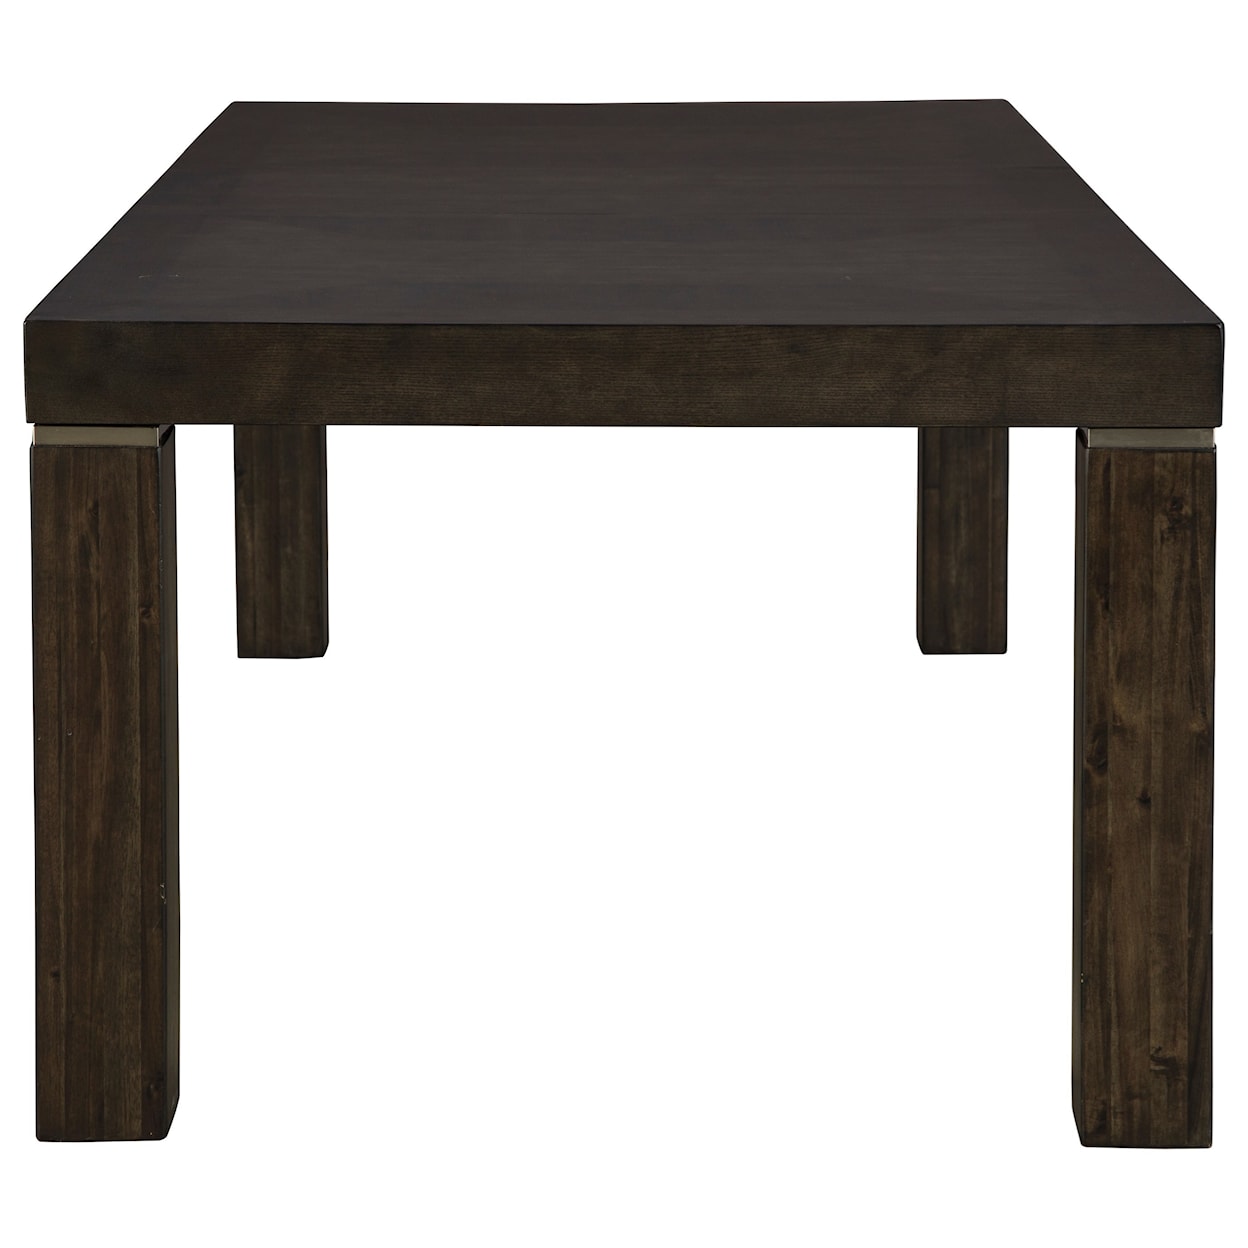 Signature Design by Ashley Hyndell Rectangular Dining Room Extension Table